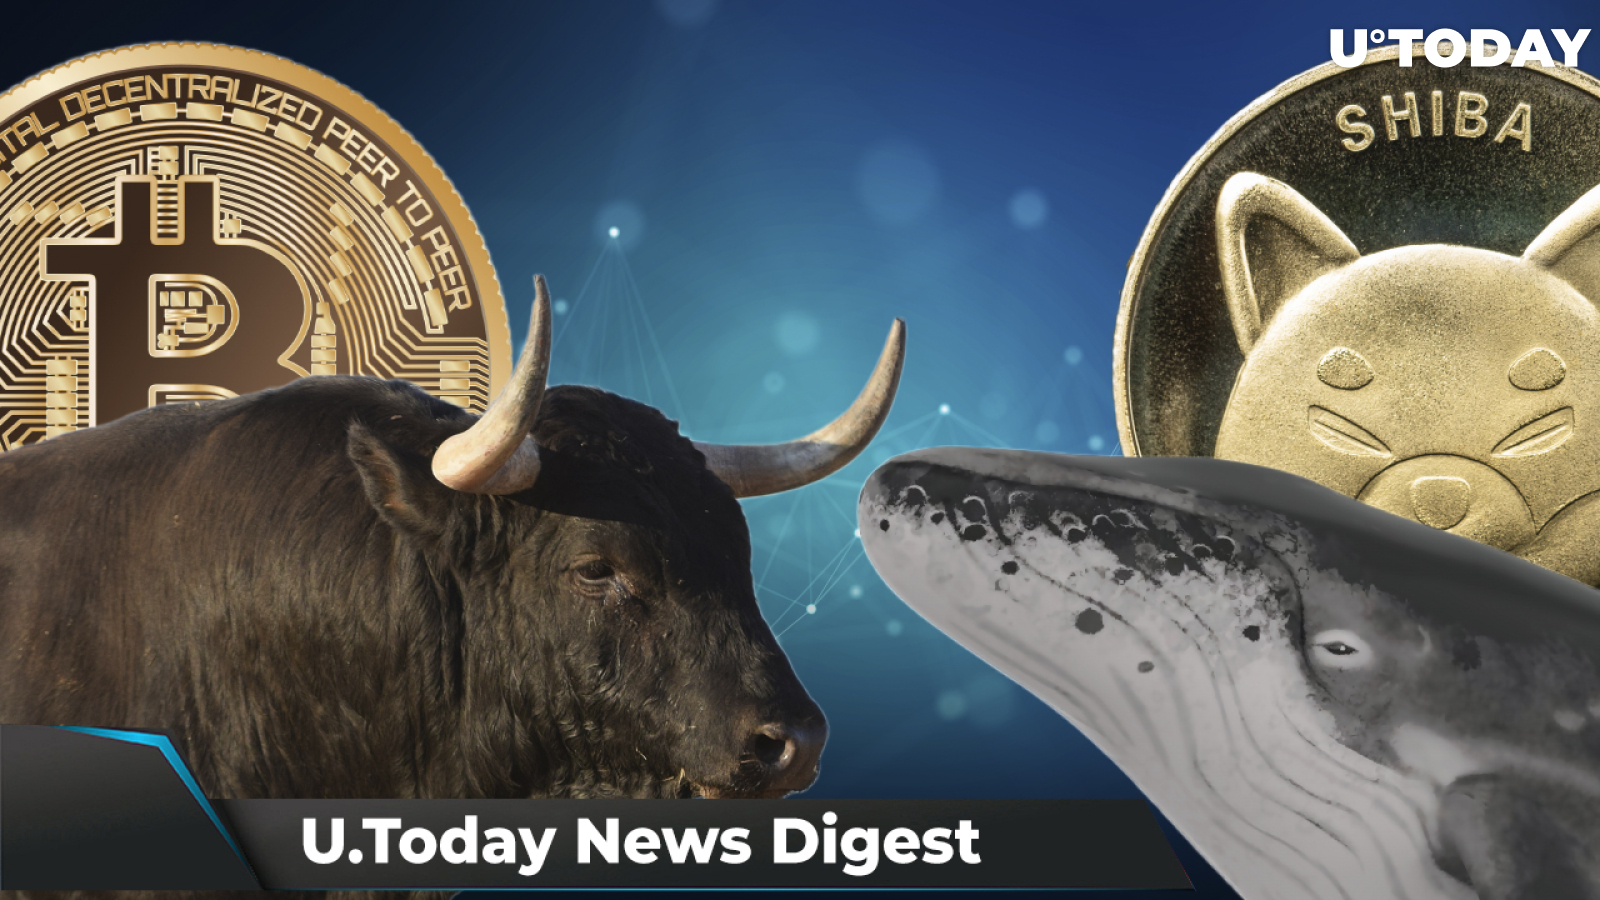 SHIB Whale Buys 171 Billion Tokens, BTC Bulls Are Betting on $100,000-$200,000, Shiba Inu Integrated by CoinGate: Crypto News Digest by U.Today